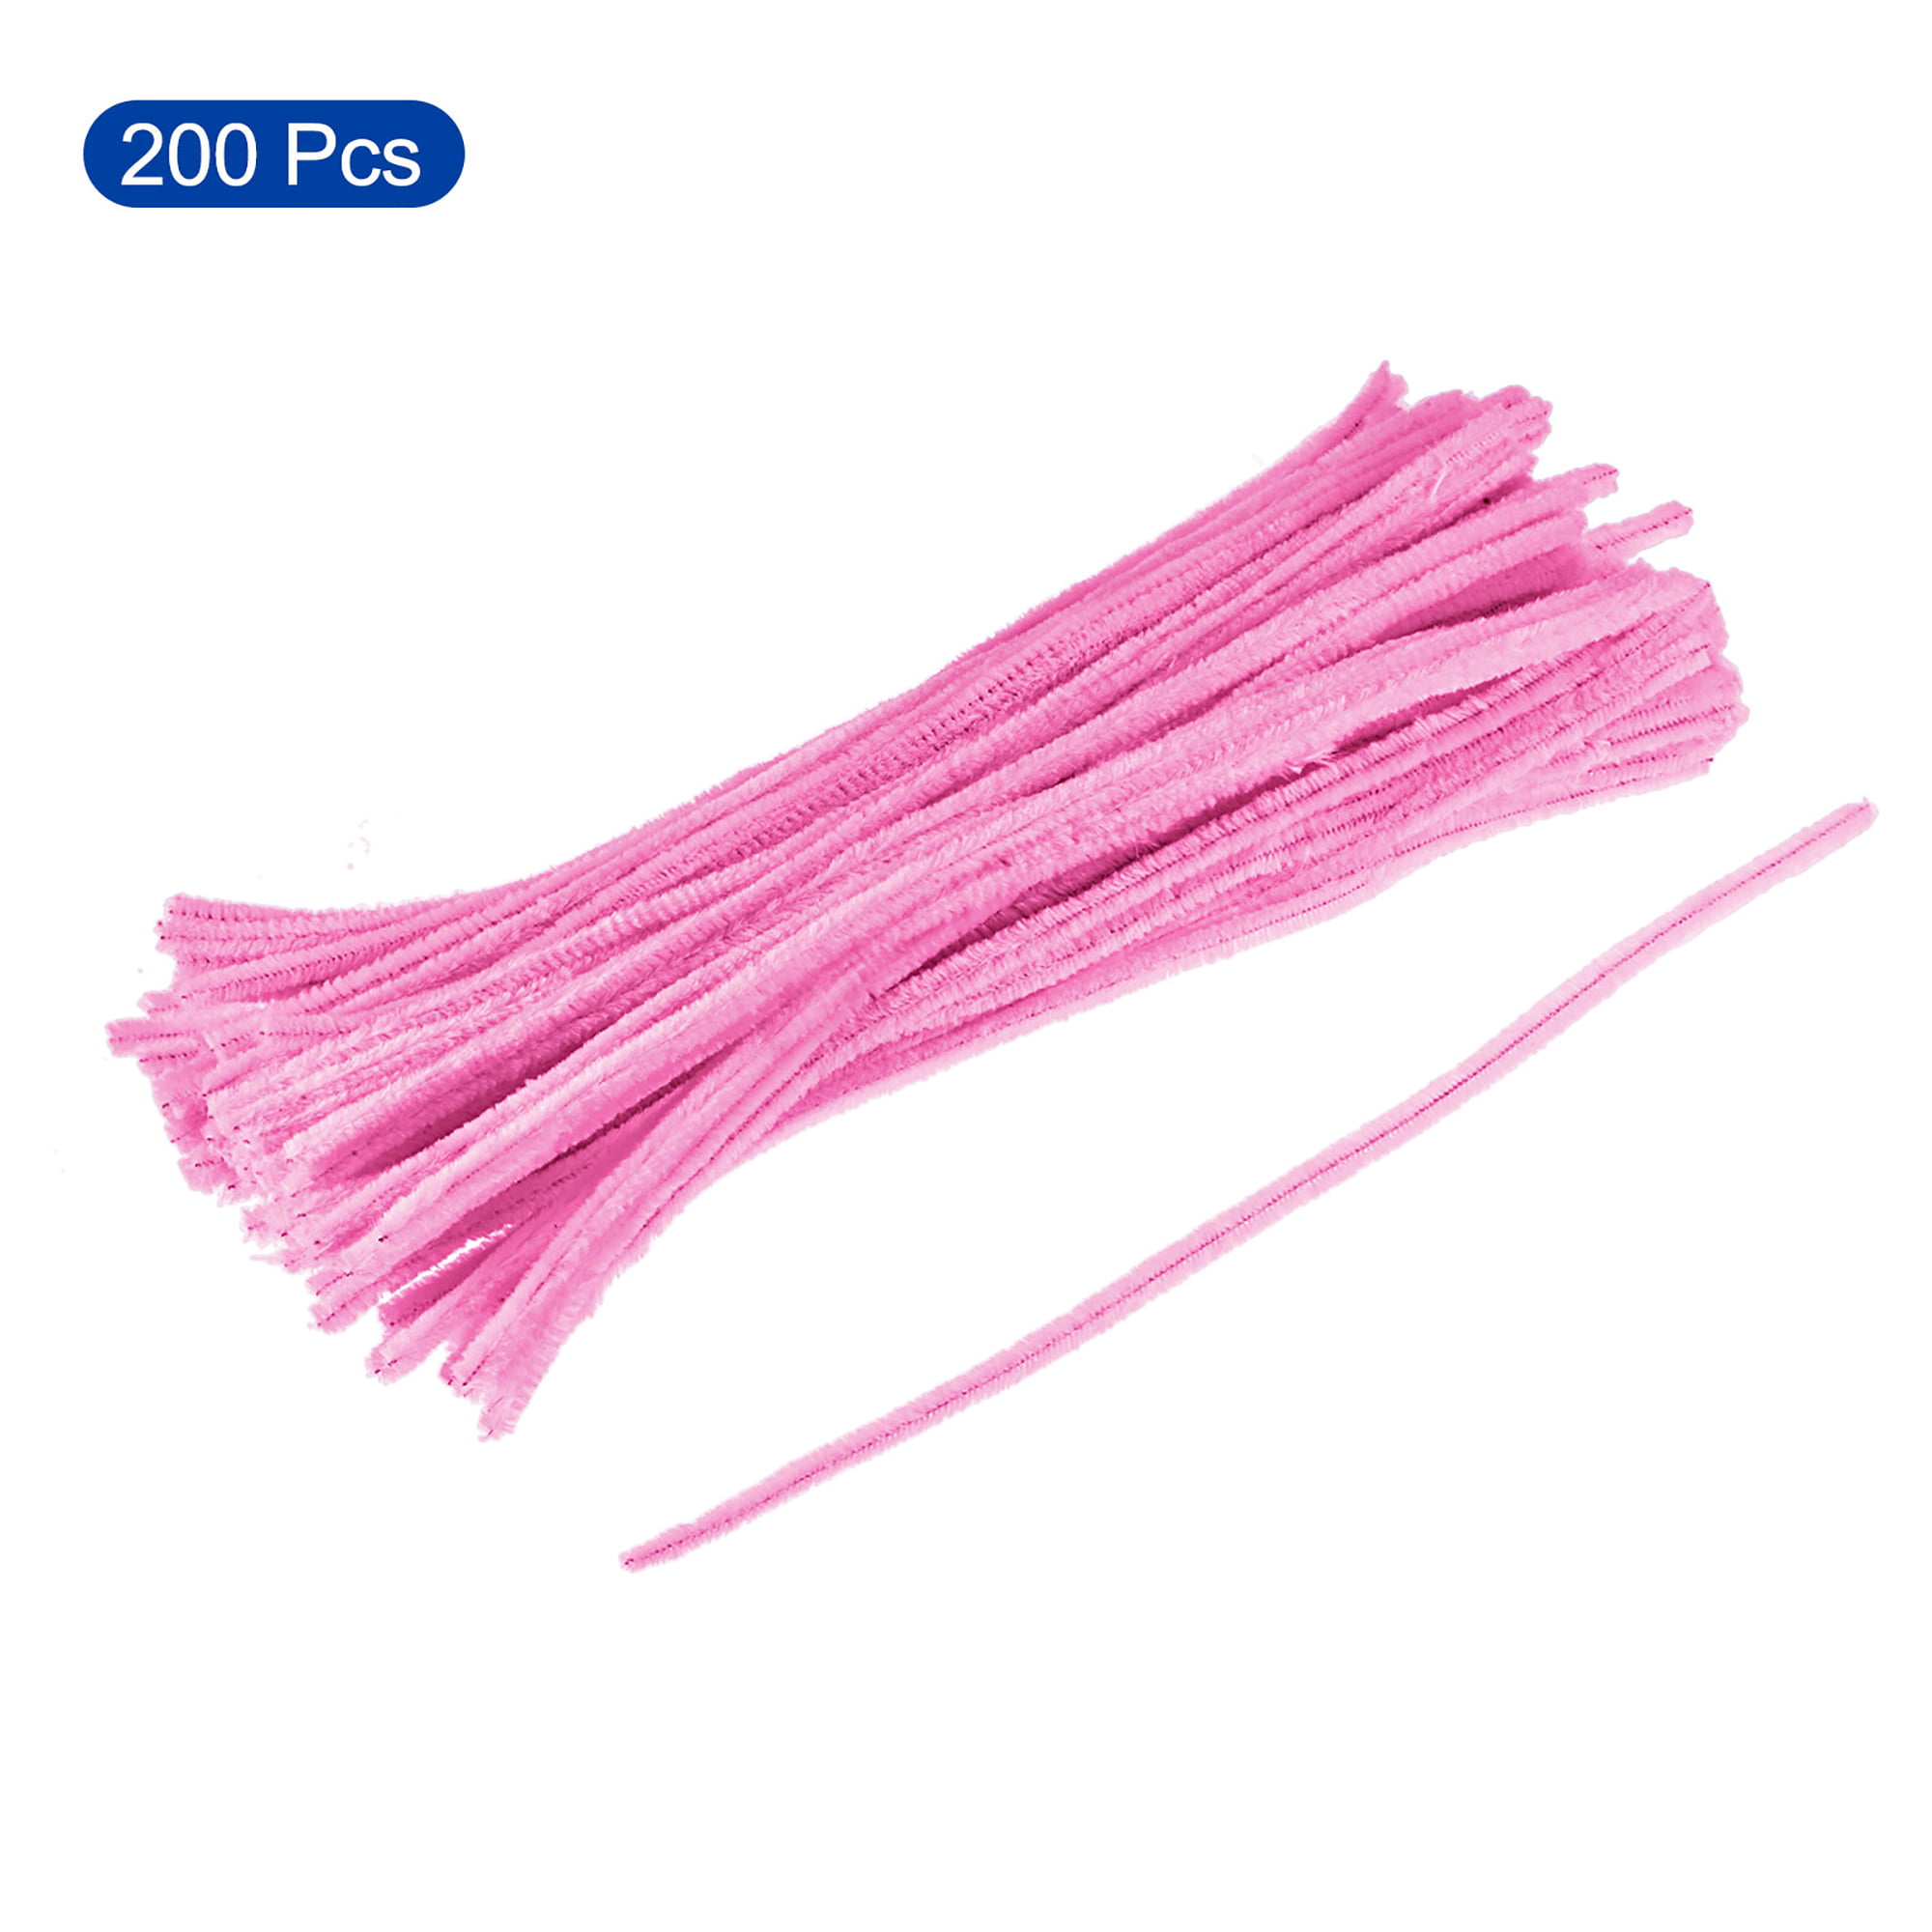 12 Pipe Cleaners (25pk) - Purple - Vibes & Scribes